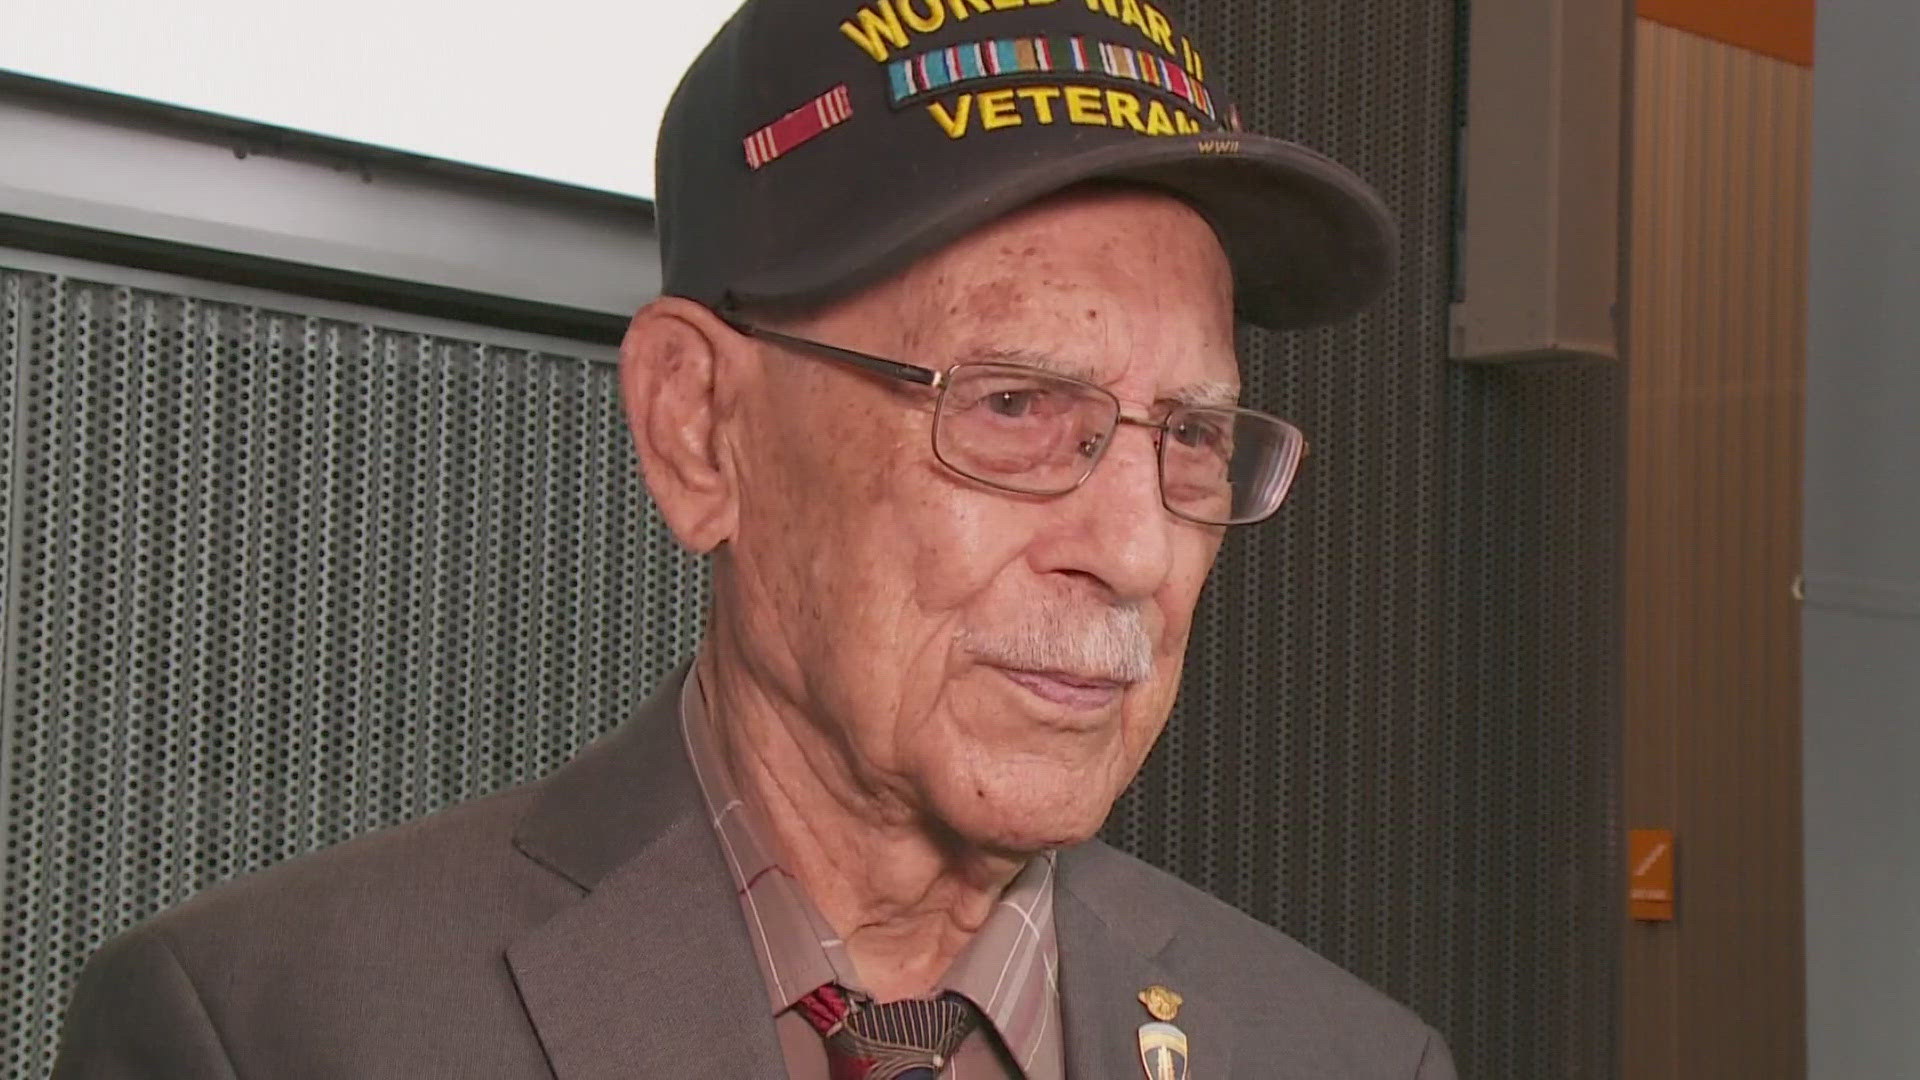 D-Day veterans were the guests of honor at the World War 2 Museum Thursday in celebration of the 80th anniversary D-Day.